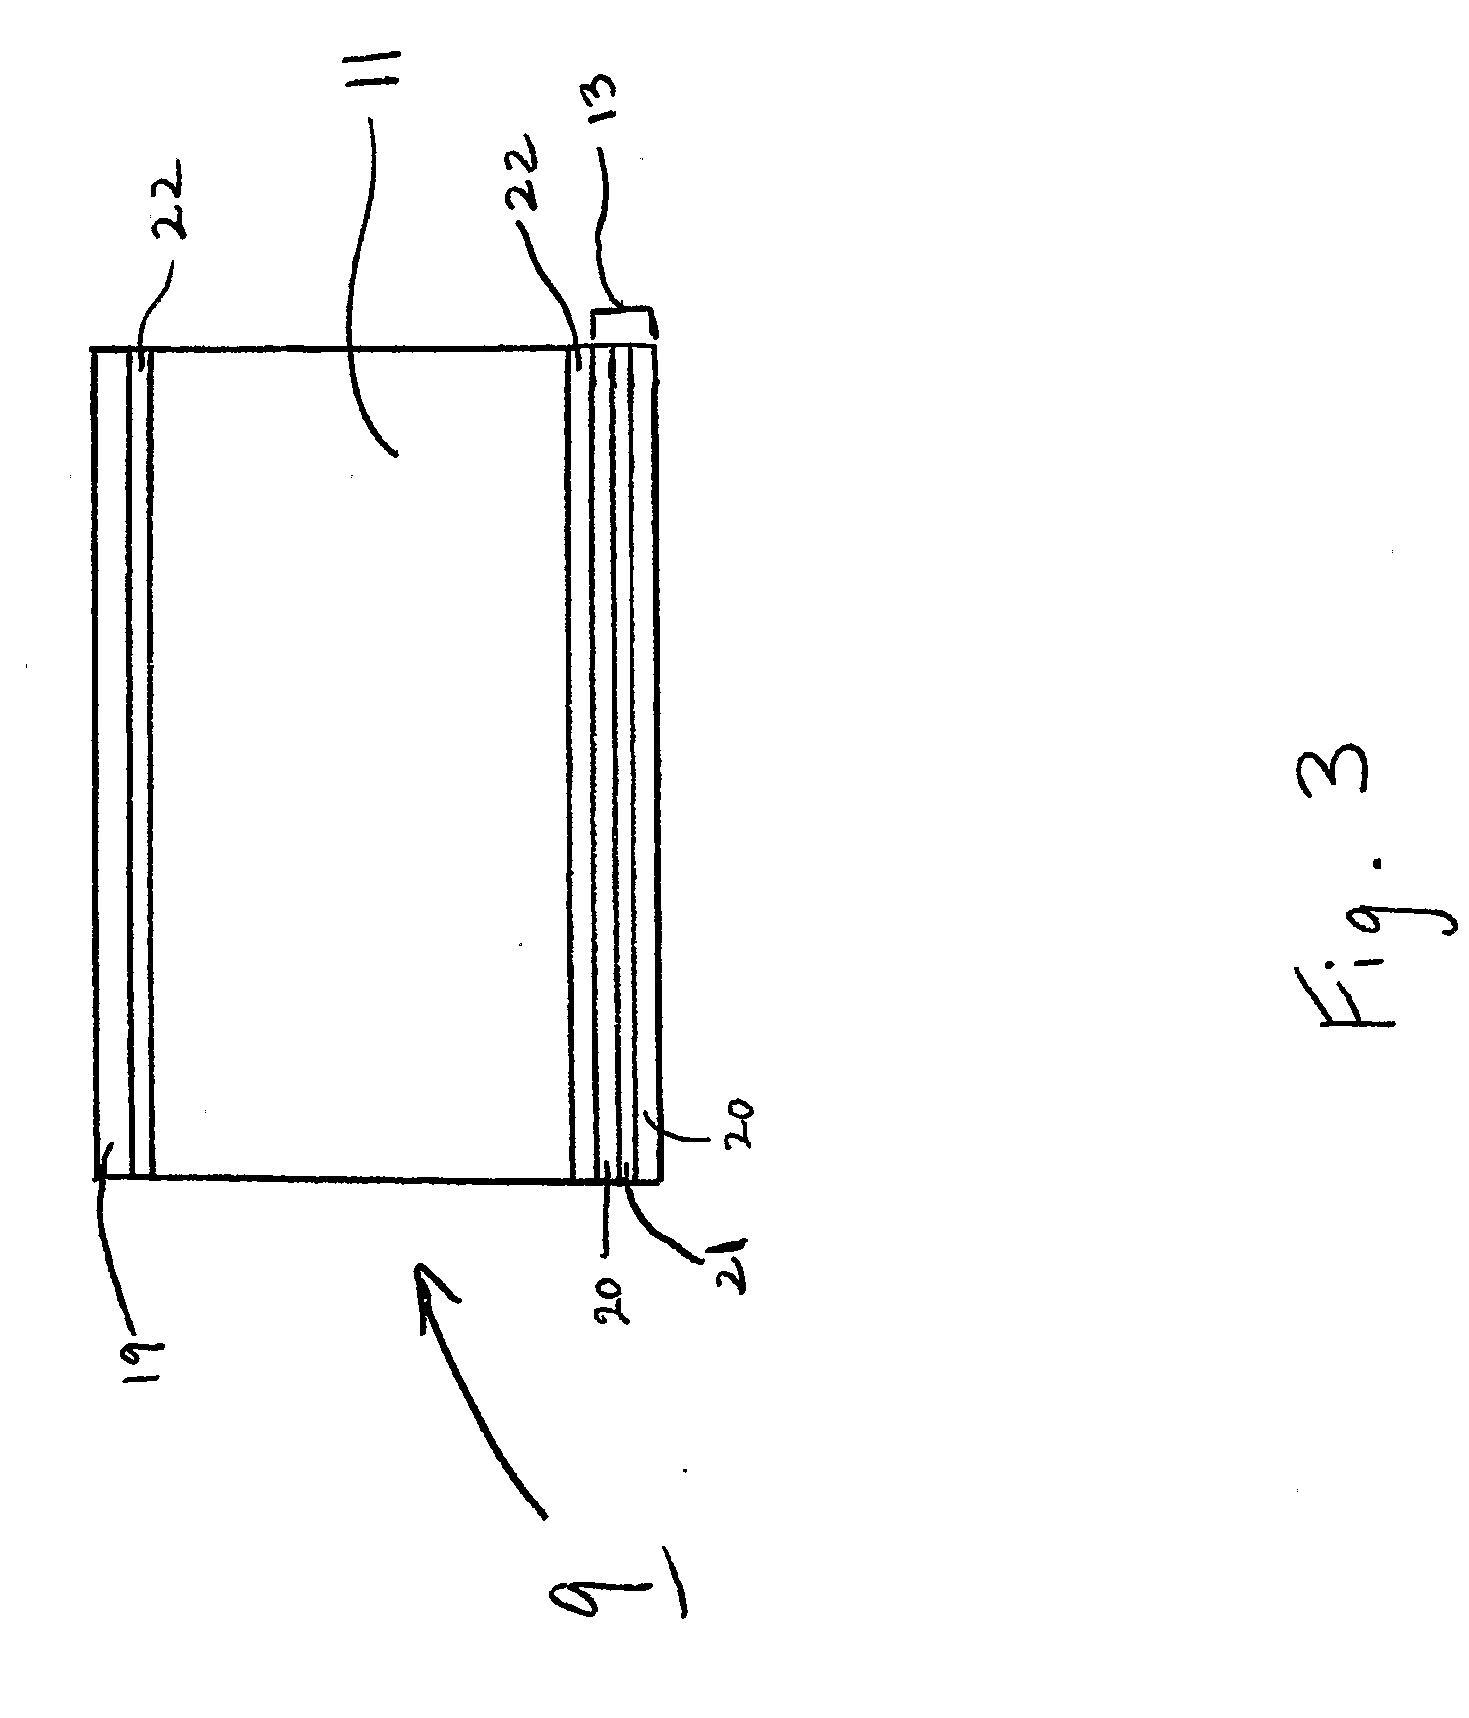 Method and Apparatus for Reducing the Infrared and Radar Signature of a Vehicle